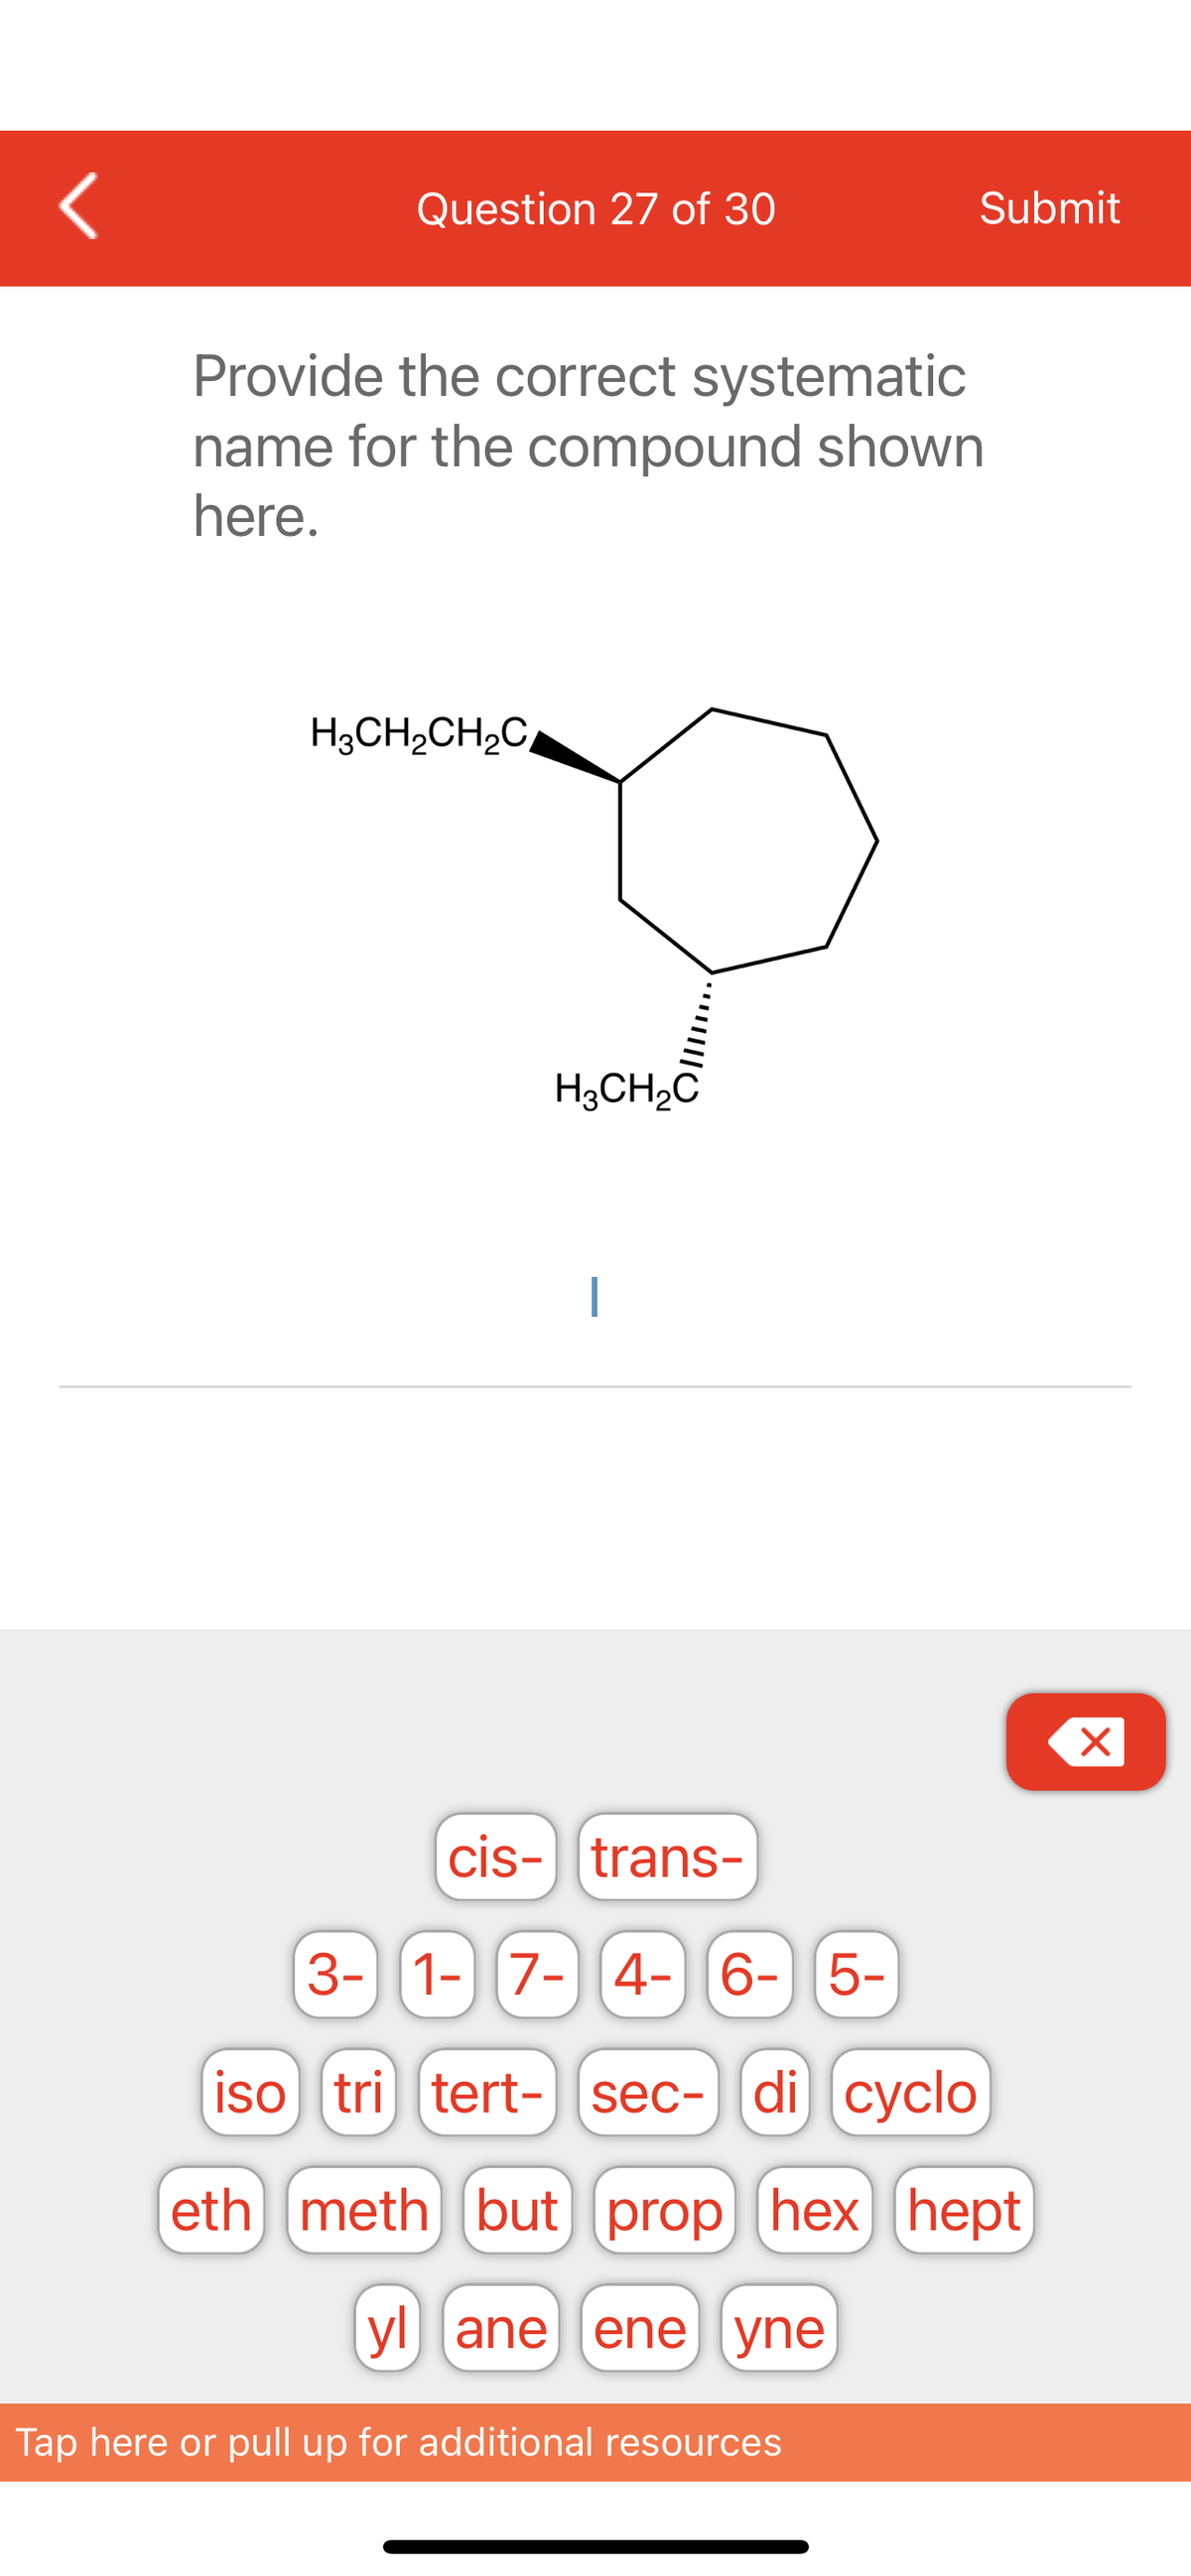 <
Question 27 of 30
Provide the correct systematic
name for the compound shown
here.
H3CH₂CH₂C
H3CH₂C
Submit
cis-trans-
3- 1- 7- 4-6-5-
iso tri tert- sec- di cyclo
eth meth but prop hex hept
yl ane ene yne
Tap here or pull up for additional resources
X